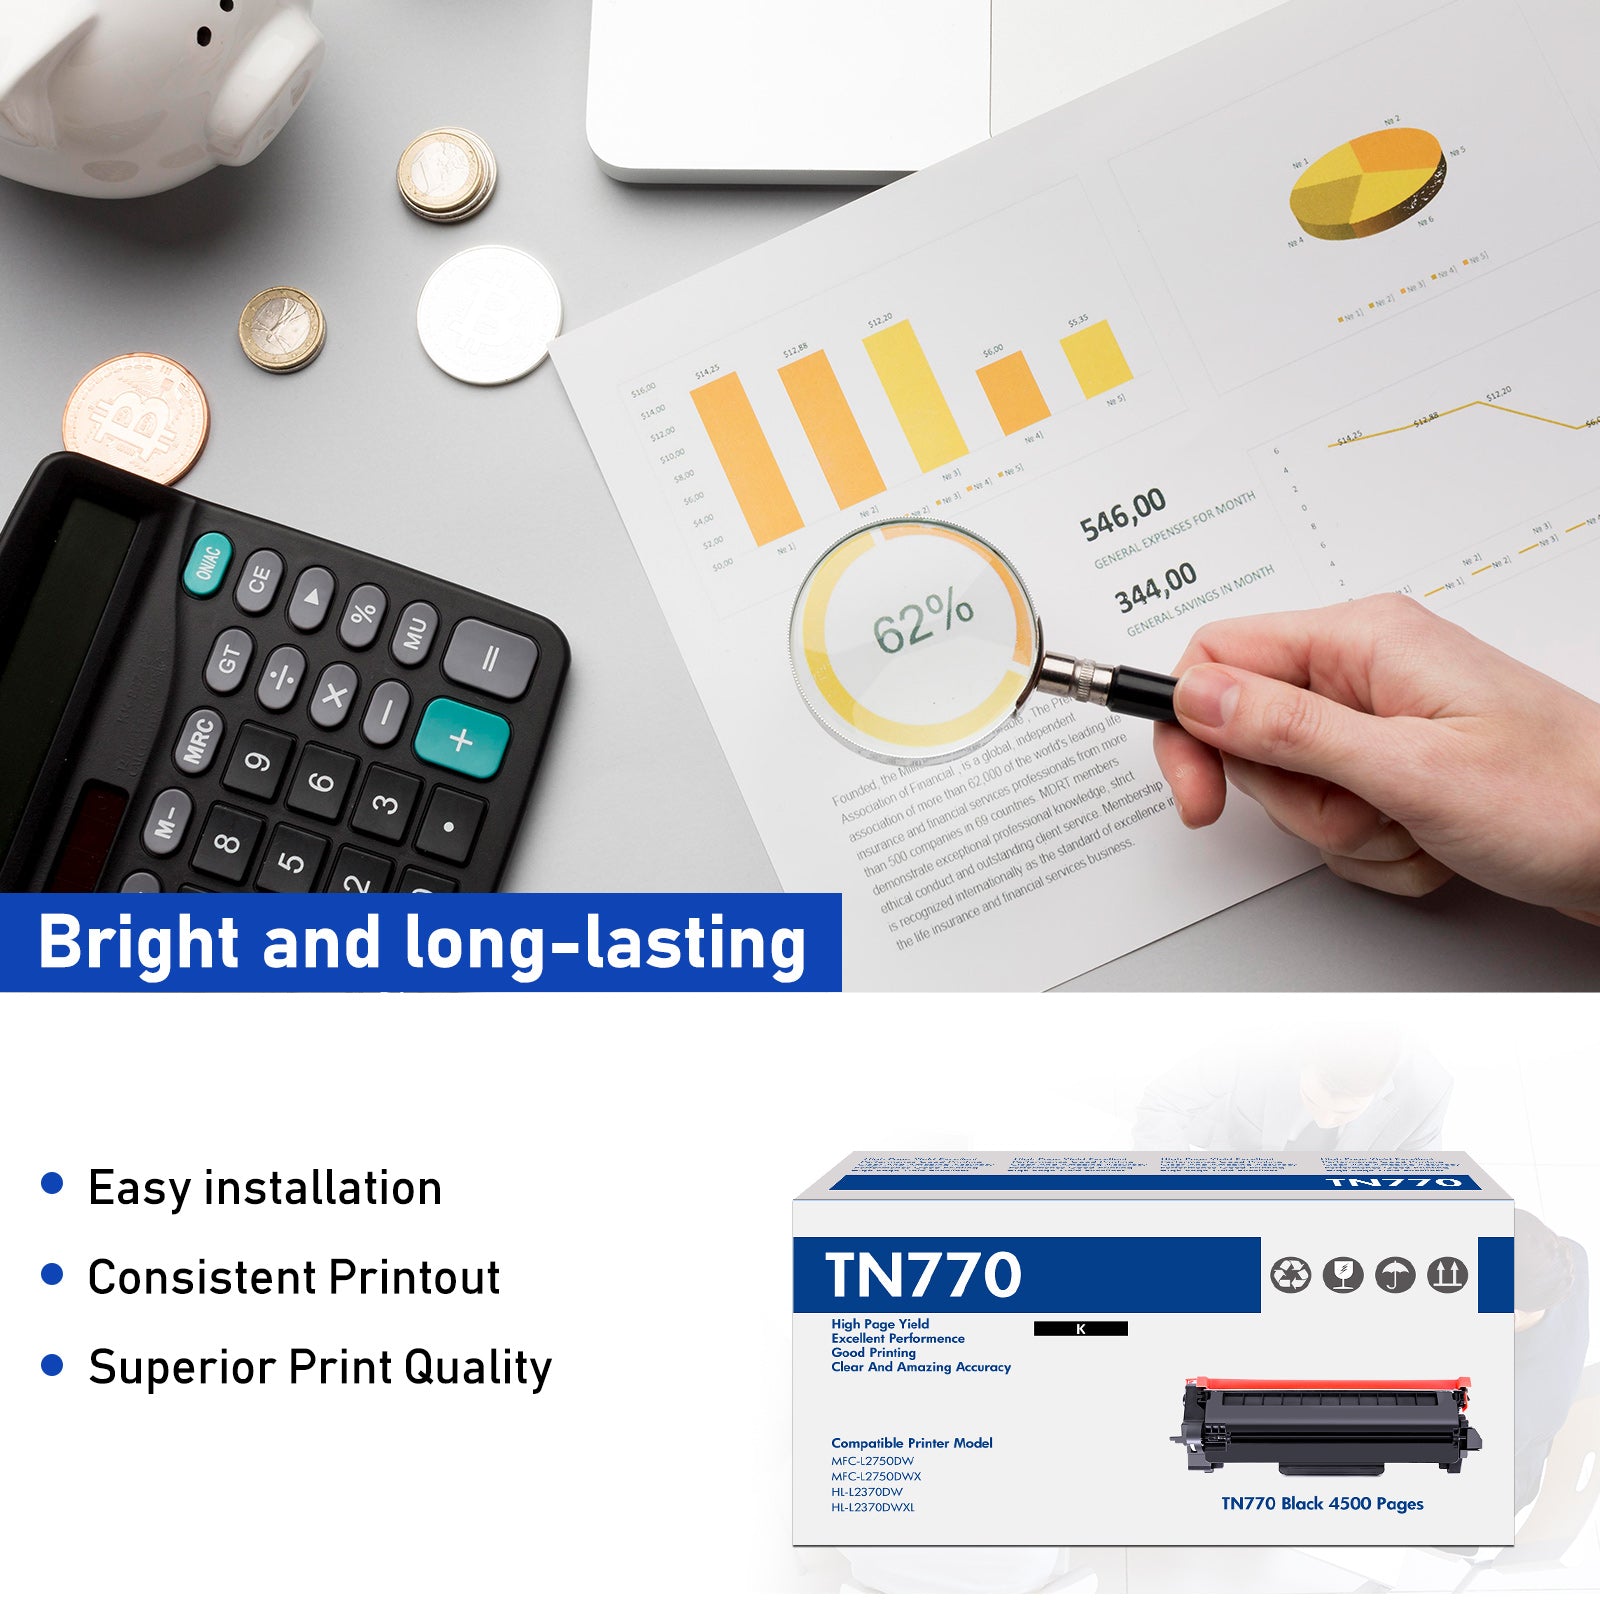 TN770 Toner Cartridge Compatible for Brother TN-770 TN 770 MFC-L2750DW MFC-L2750DWXL HL-L2370DW HL-L2370DWXL Printer High Yield (Black, 2-Pack)